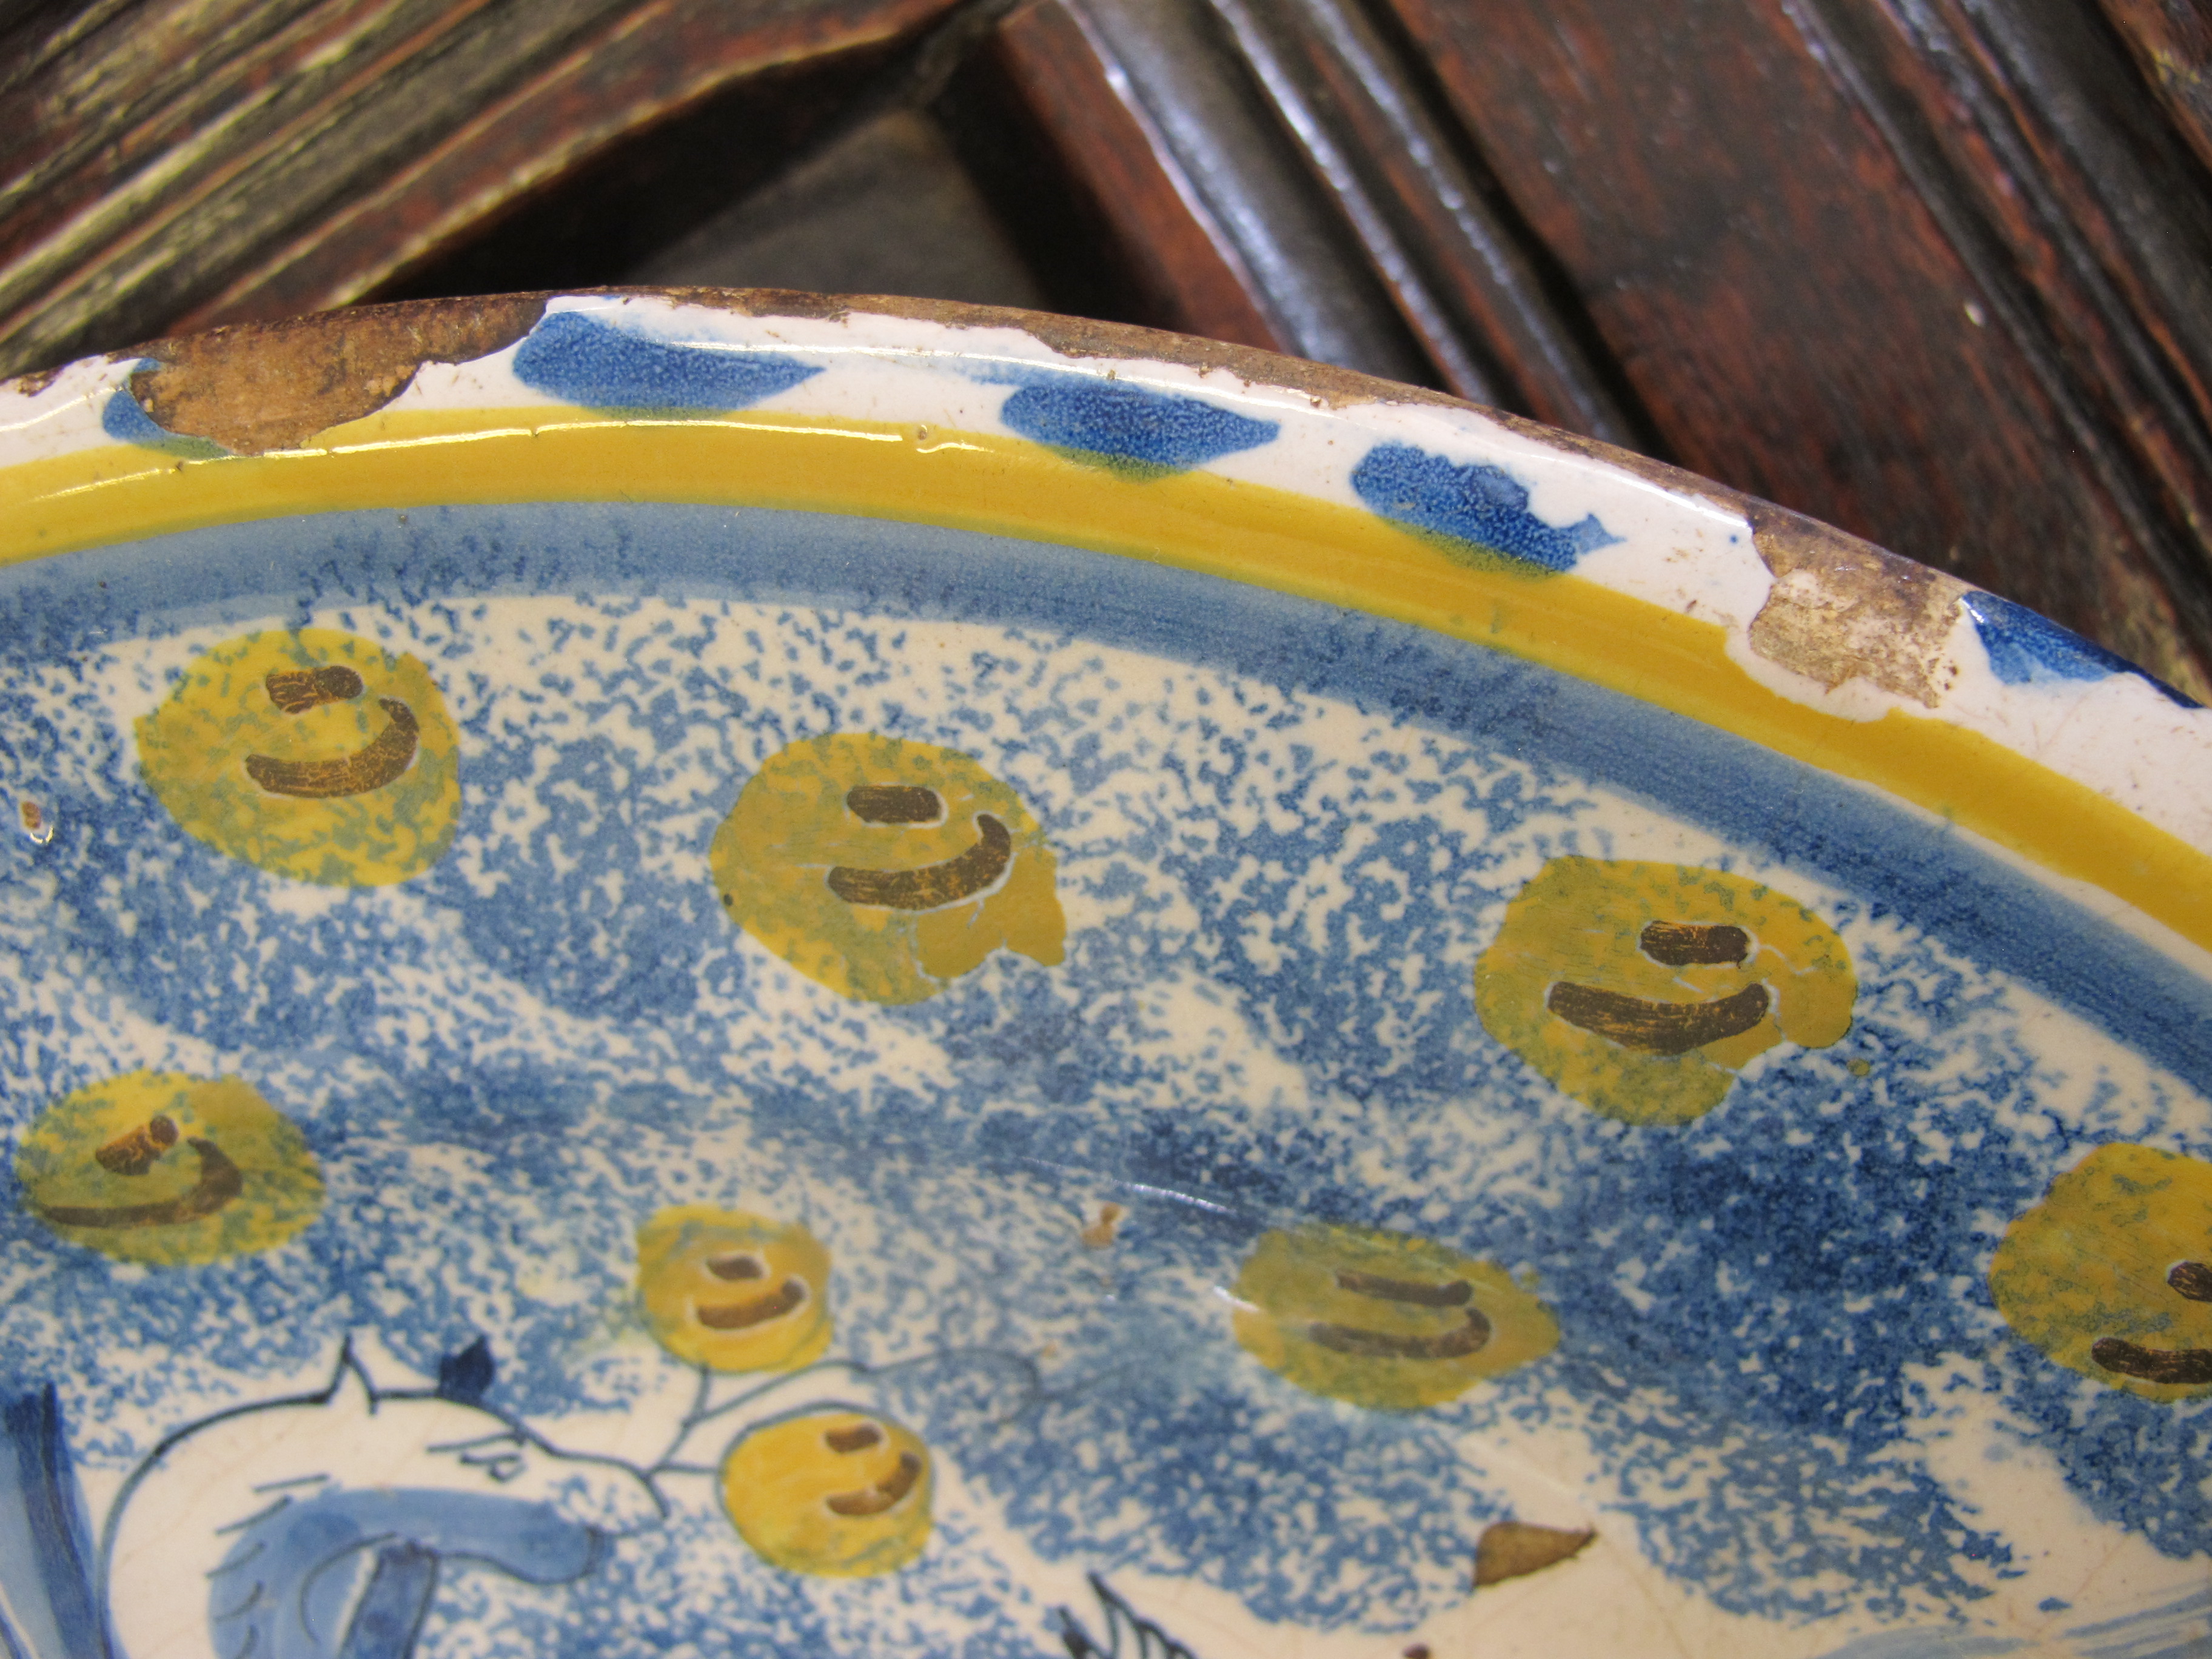 A LONDON DELFTWARE POTTERY ADAM AND EVE CHARGER ATTRIBUTED TO NORFOLK HOUSE, C.1720-30 painted in - Image 3 of 12